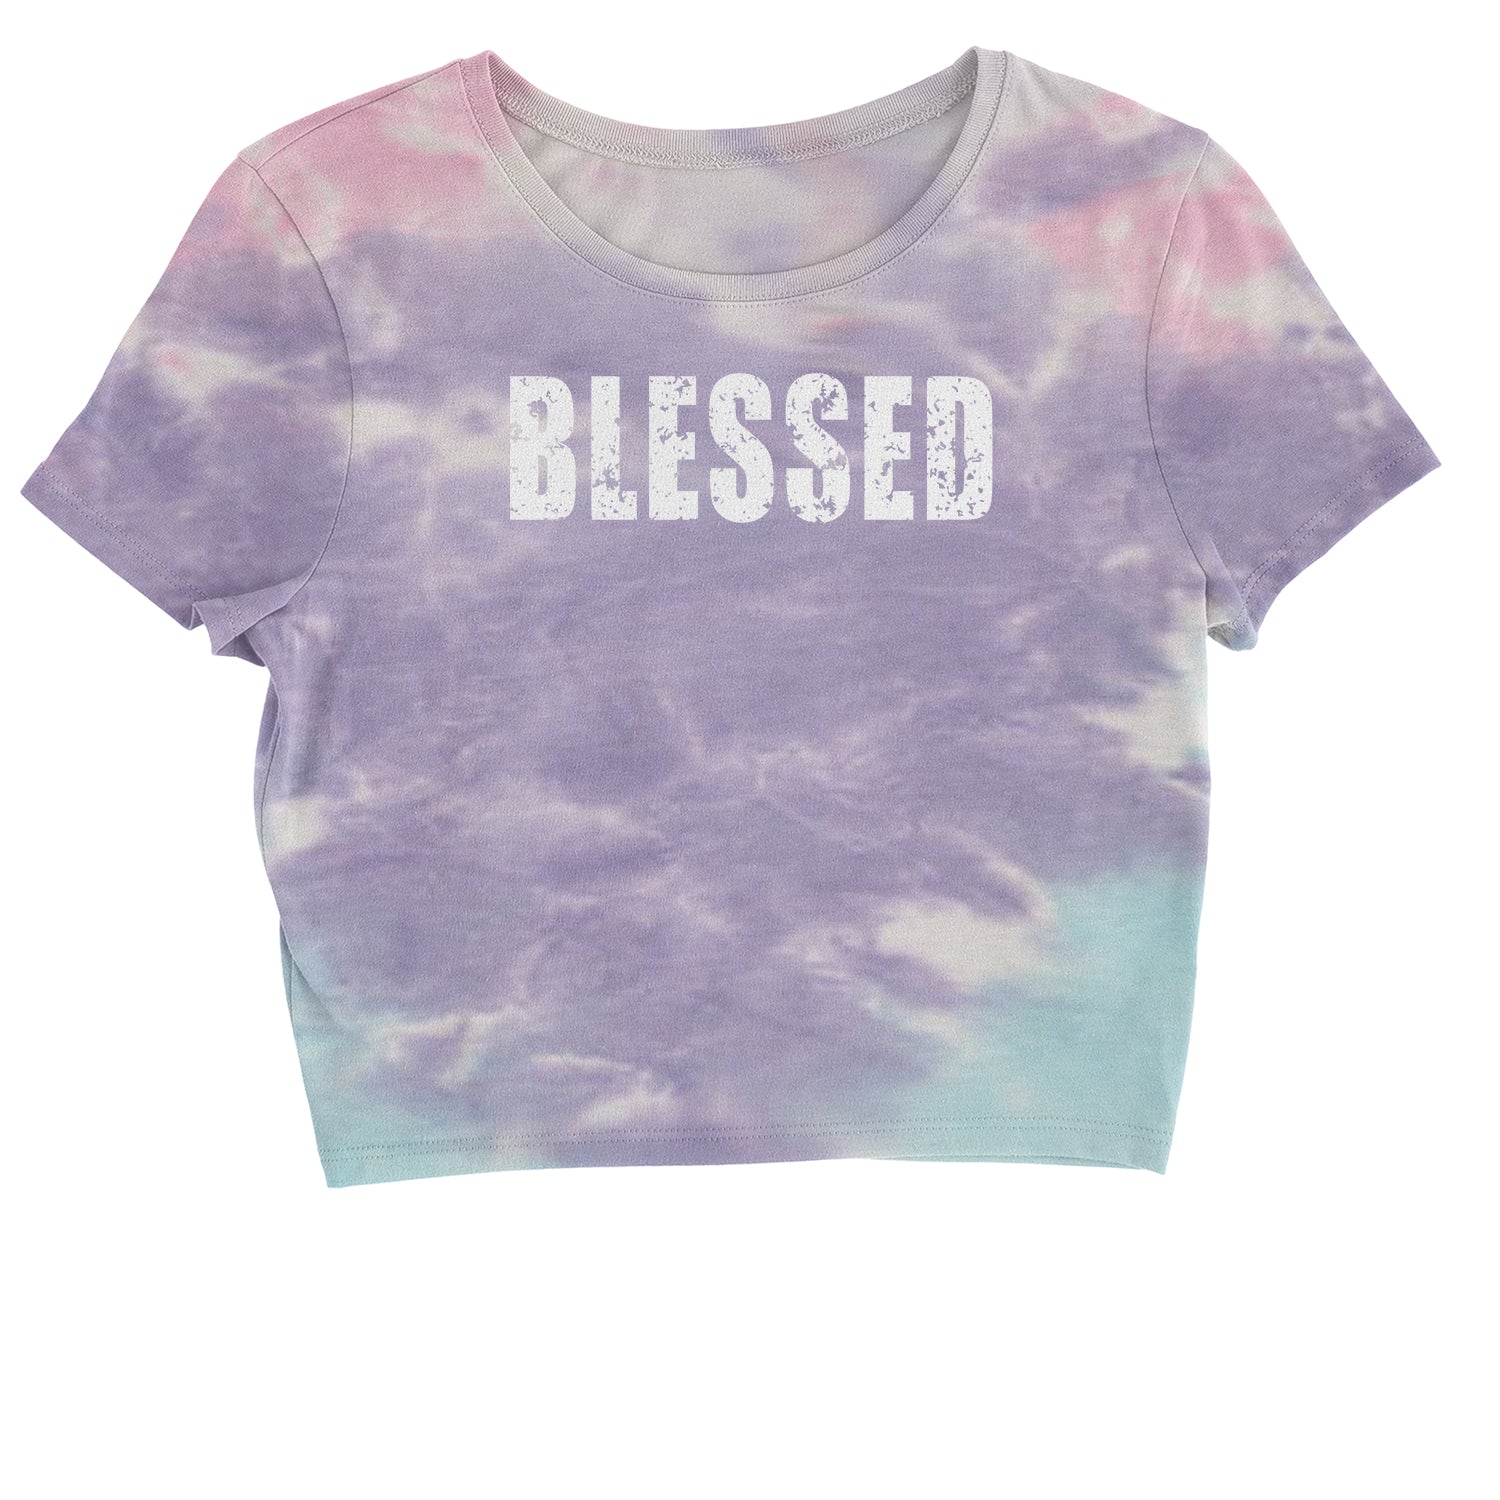 Blessed Religious Grateful Thankful Cropped T-Shirt #expressiontees by Expression Tees